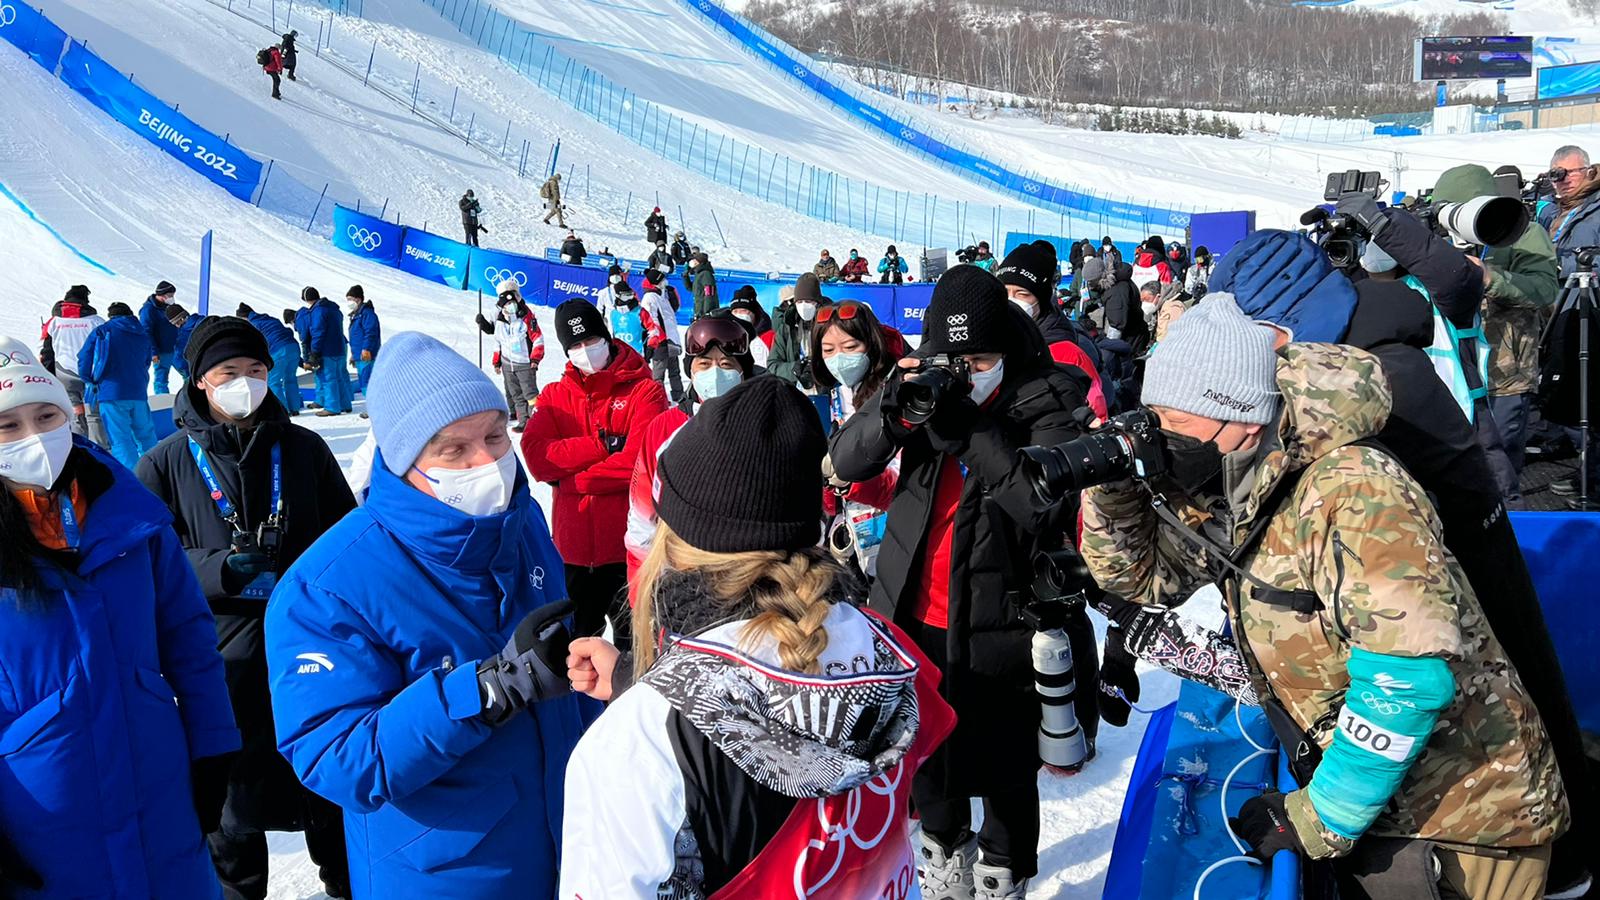 American snowboarder Chloe Kim fist bumps Thomas Bach on Thursday after winning gold.